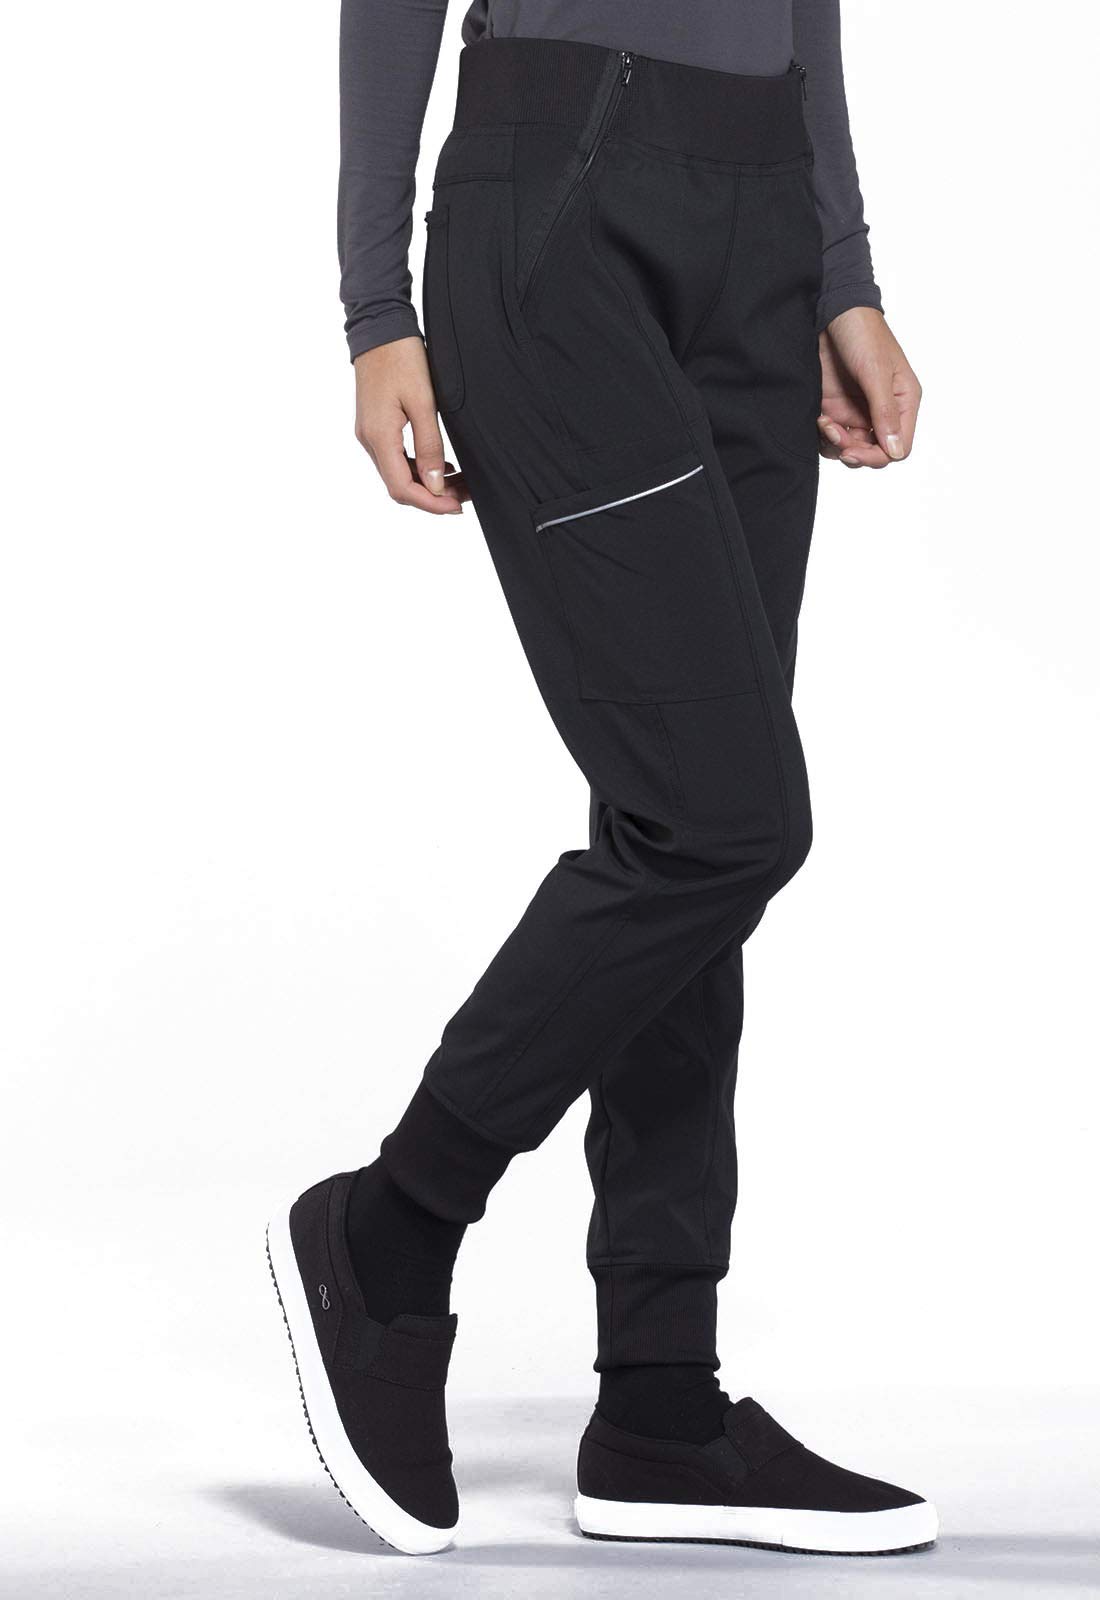 Jogger Scrub Pants for Women 4-Way Stretch with Mid Rise, Cargo Pocket, Superior Performance, and Comfort CK110A